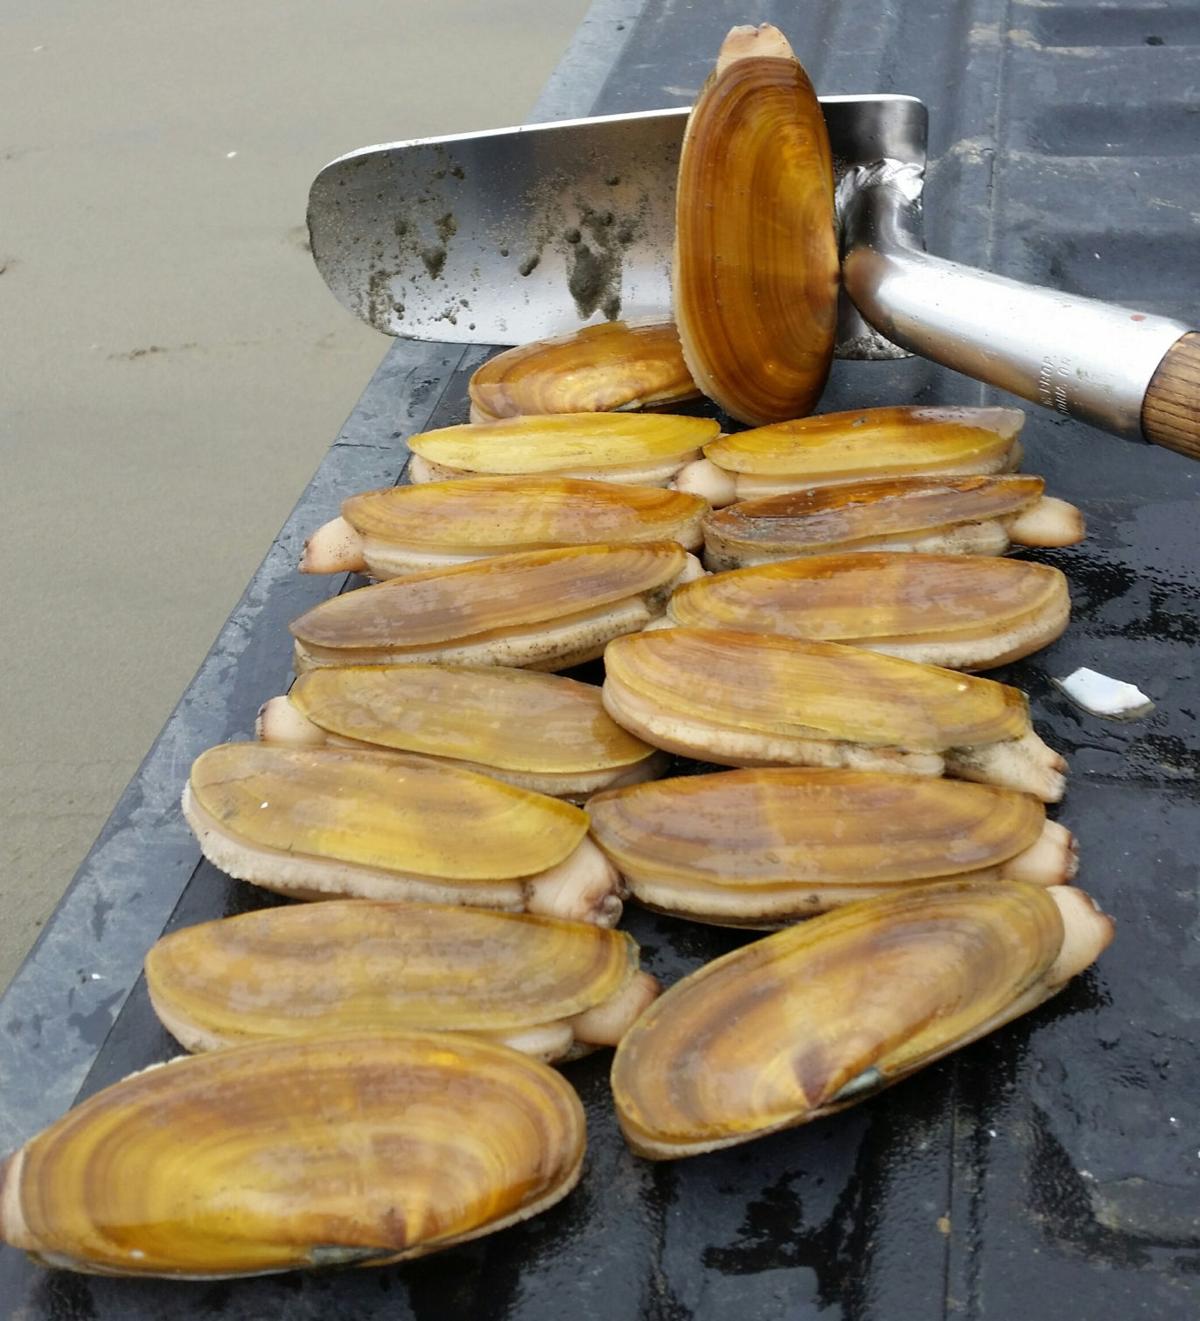 WDFW proposes threeday razor clam dig on Long Beach beginning Sept. 27 South County News